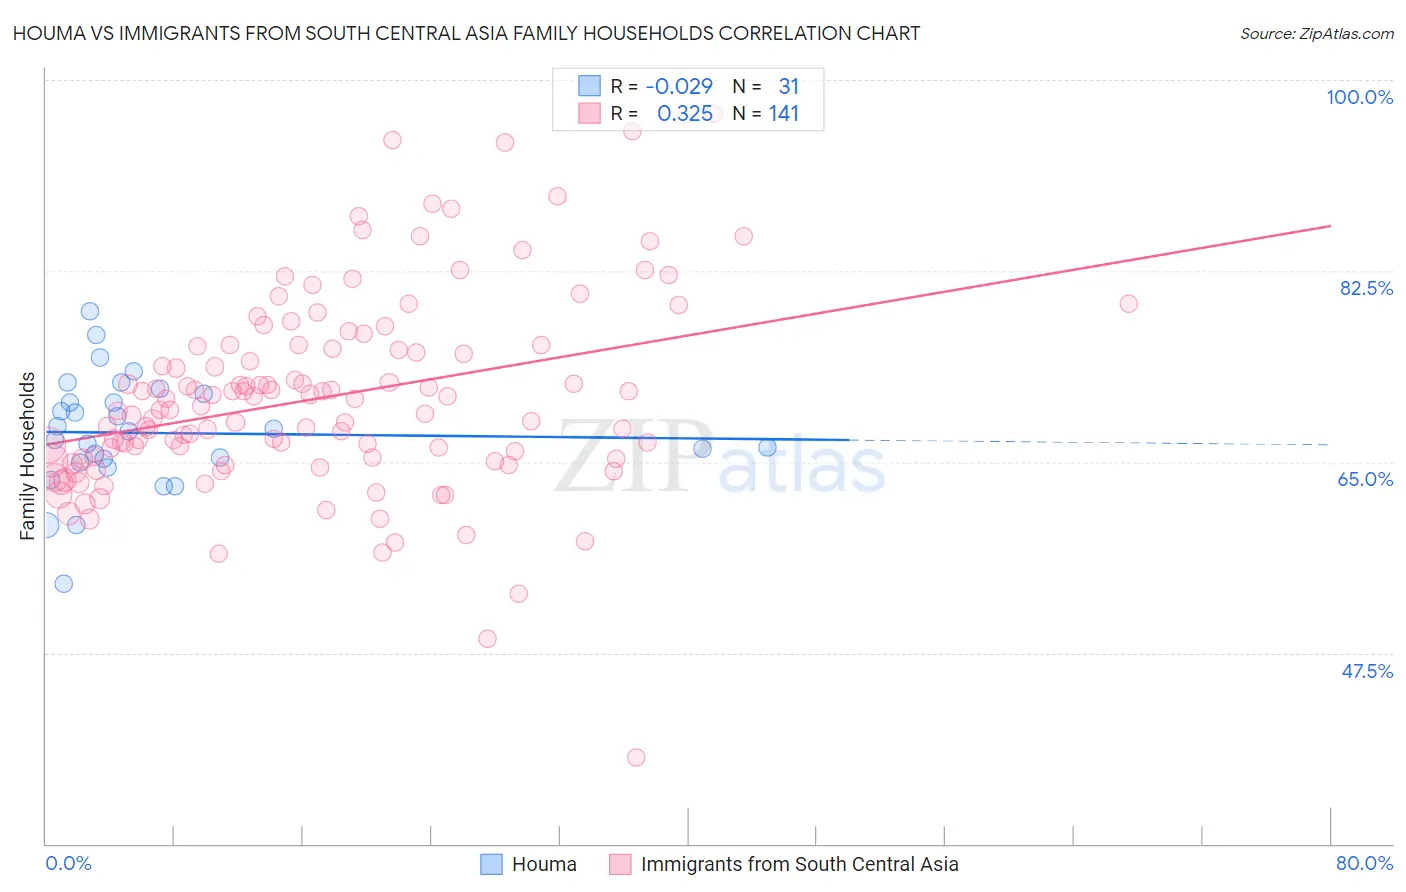 Houma vs Immigrants from South Central Asia Family Households